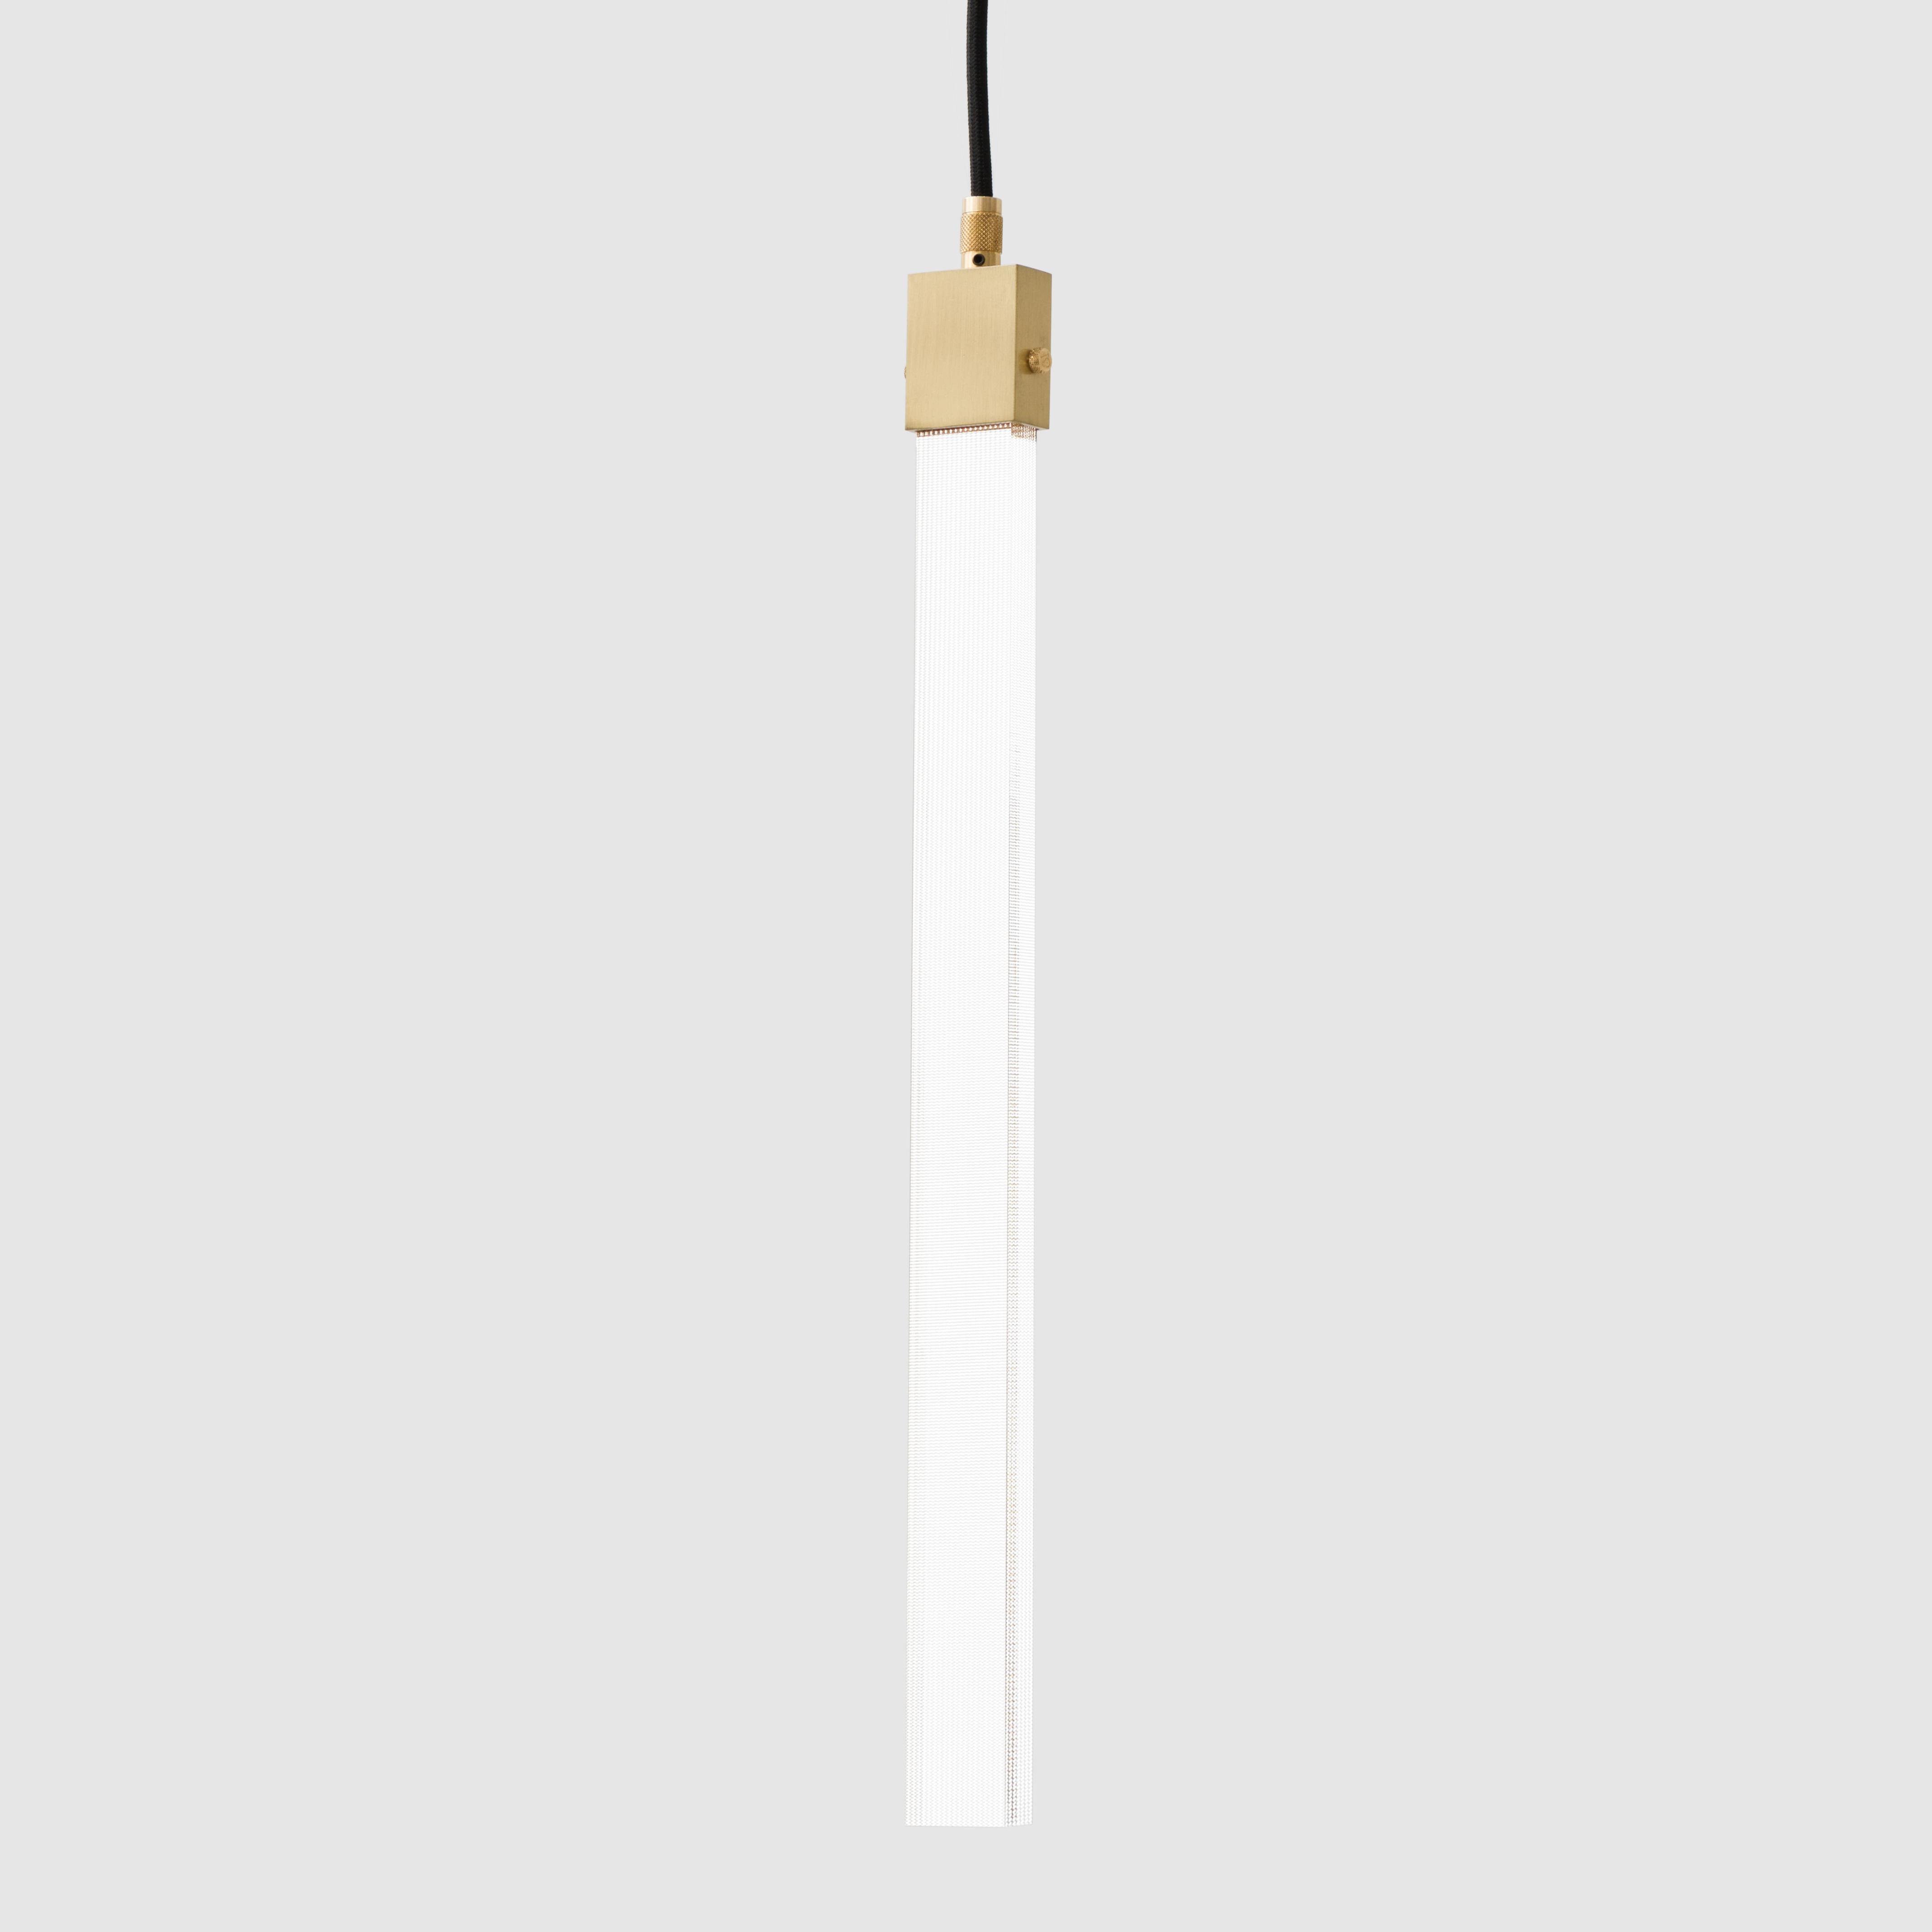 Lapis pendant by Luce Tu
Dimensions: 500 mm x 60 mm
Materials: glass and brass


Luce Tu is the story of two siblings in love with Milan, their hometown.
With the aim of enhancing the historical artisan tradition of the city without losing its